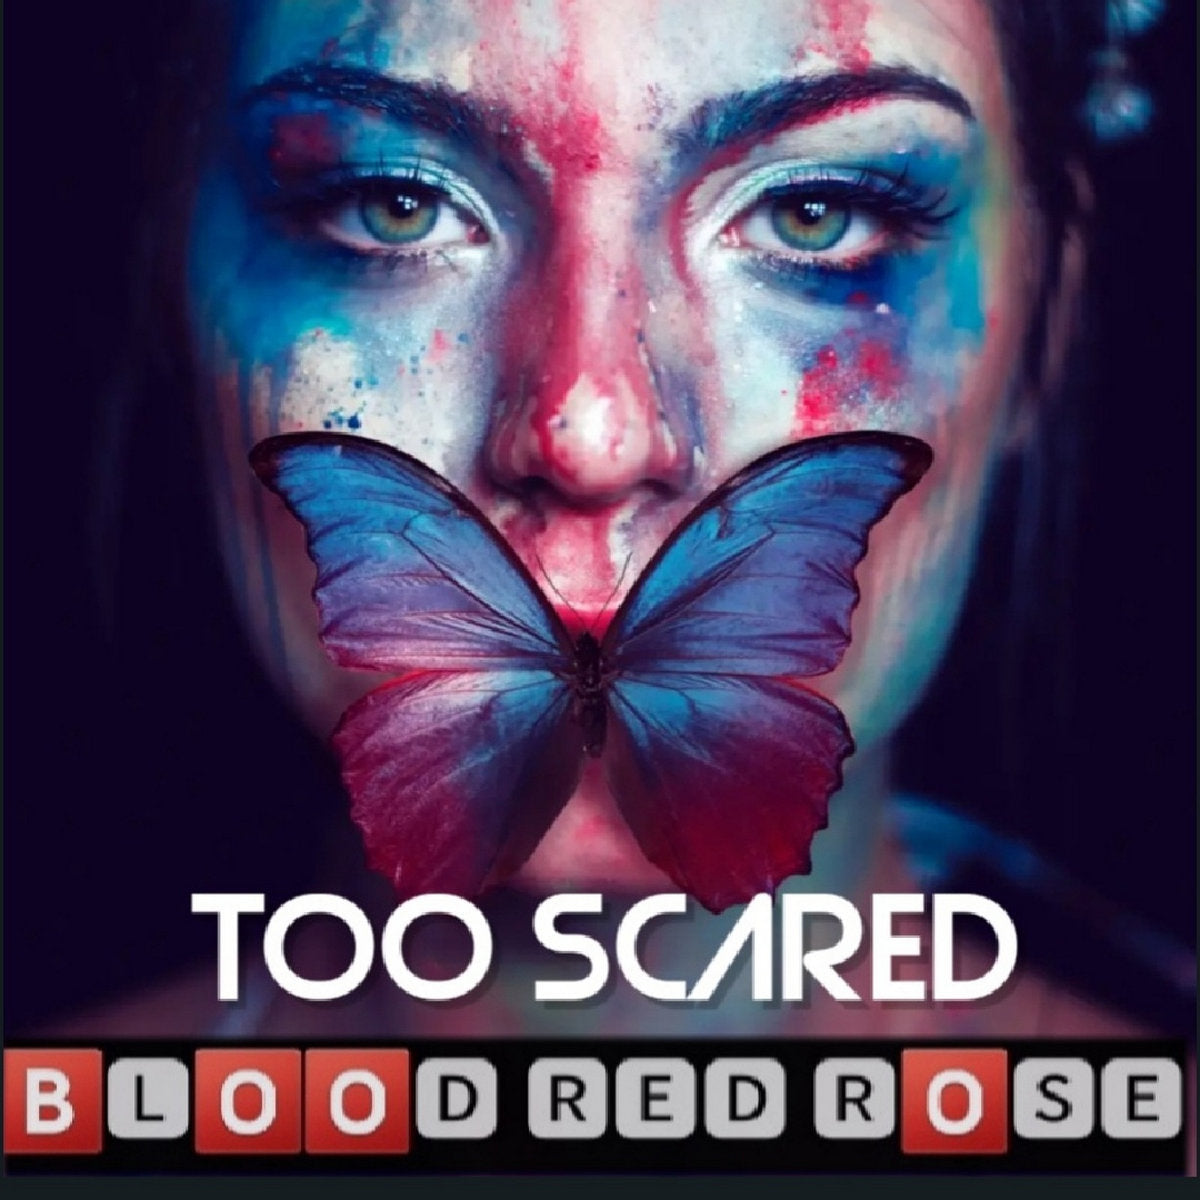 Blood Red Rose – ‘Too Scared’